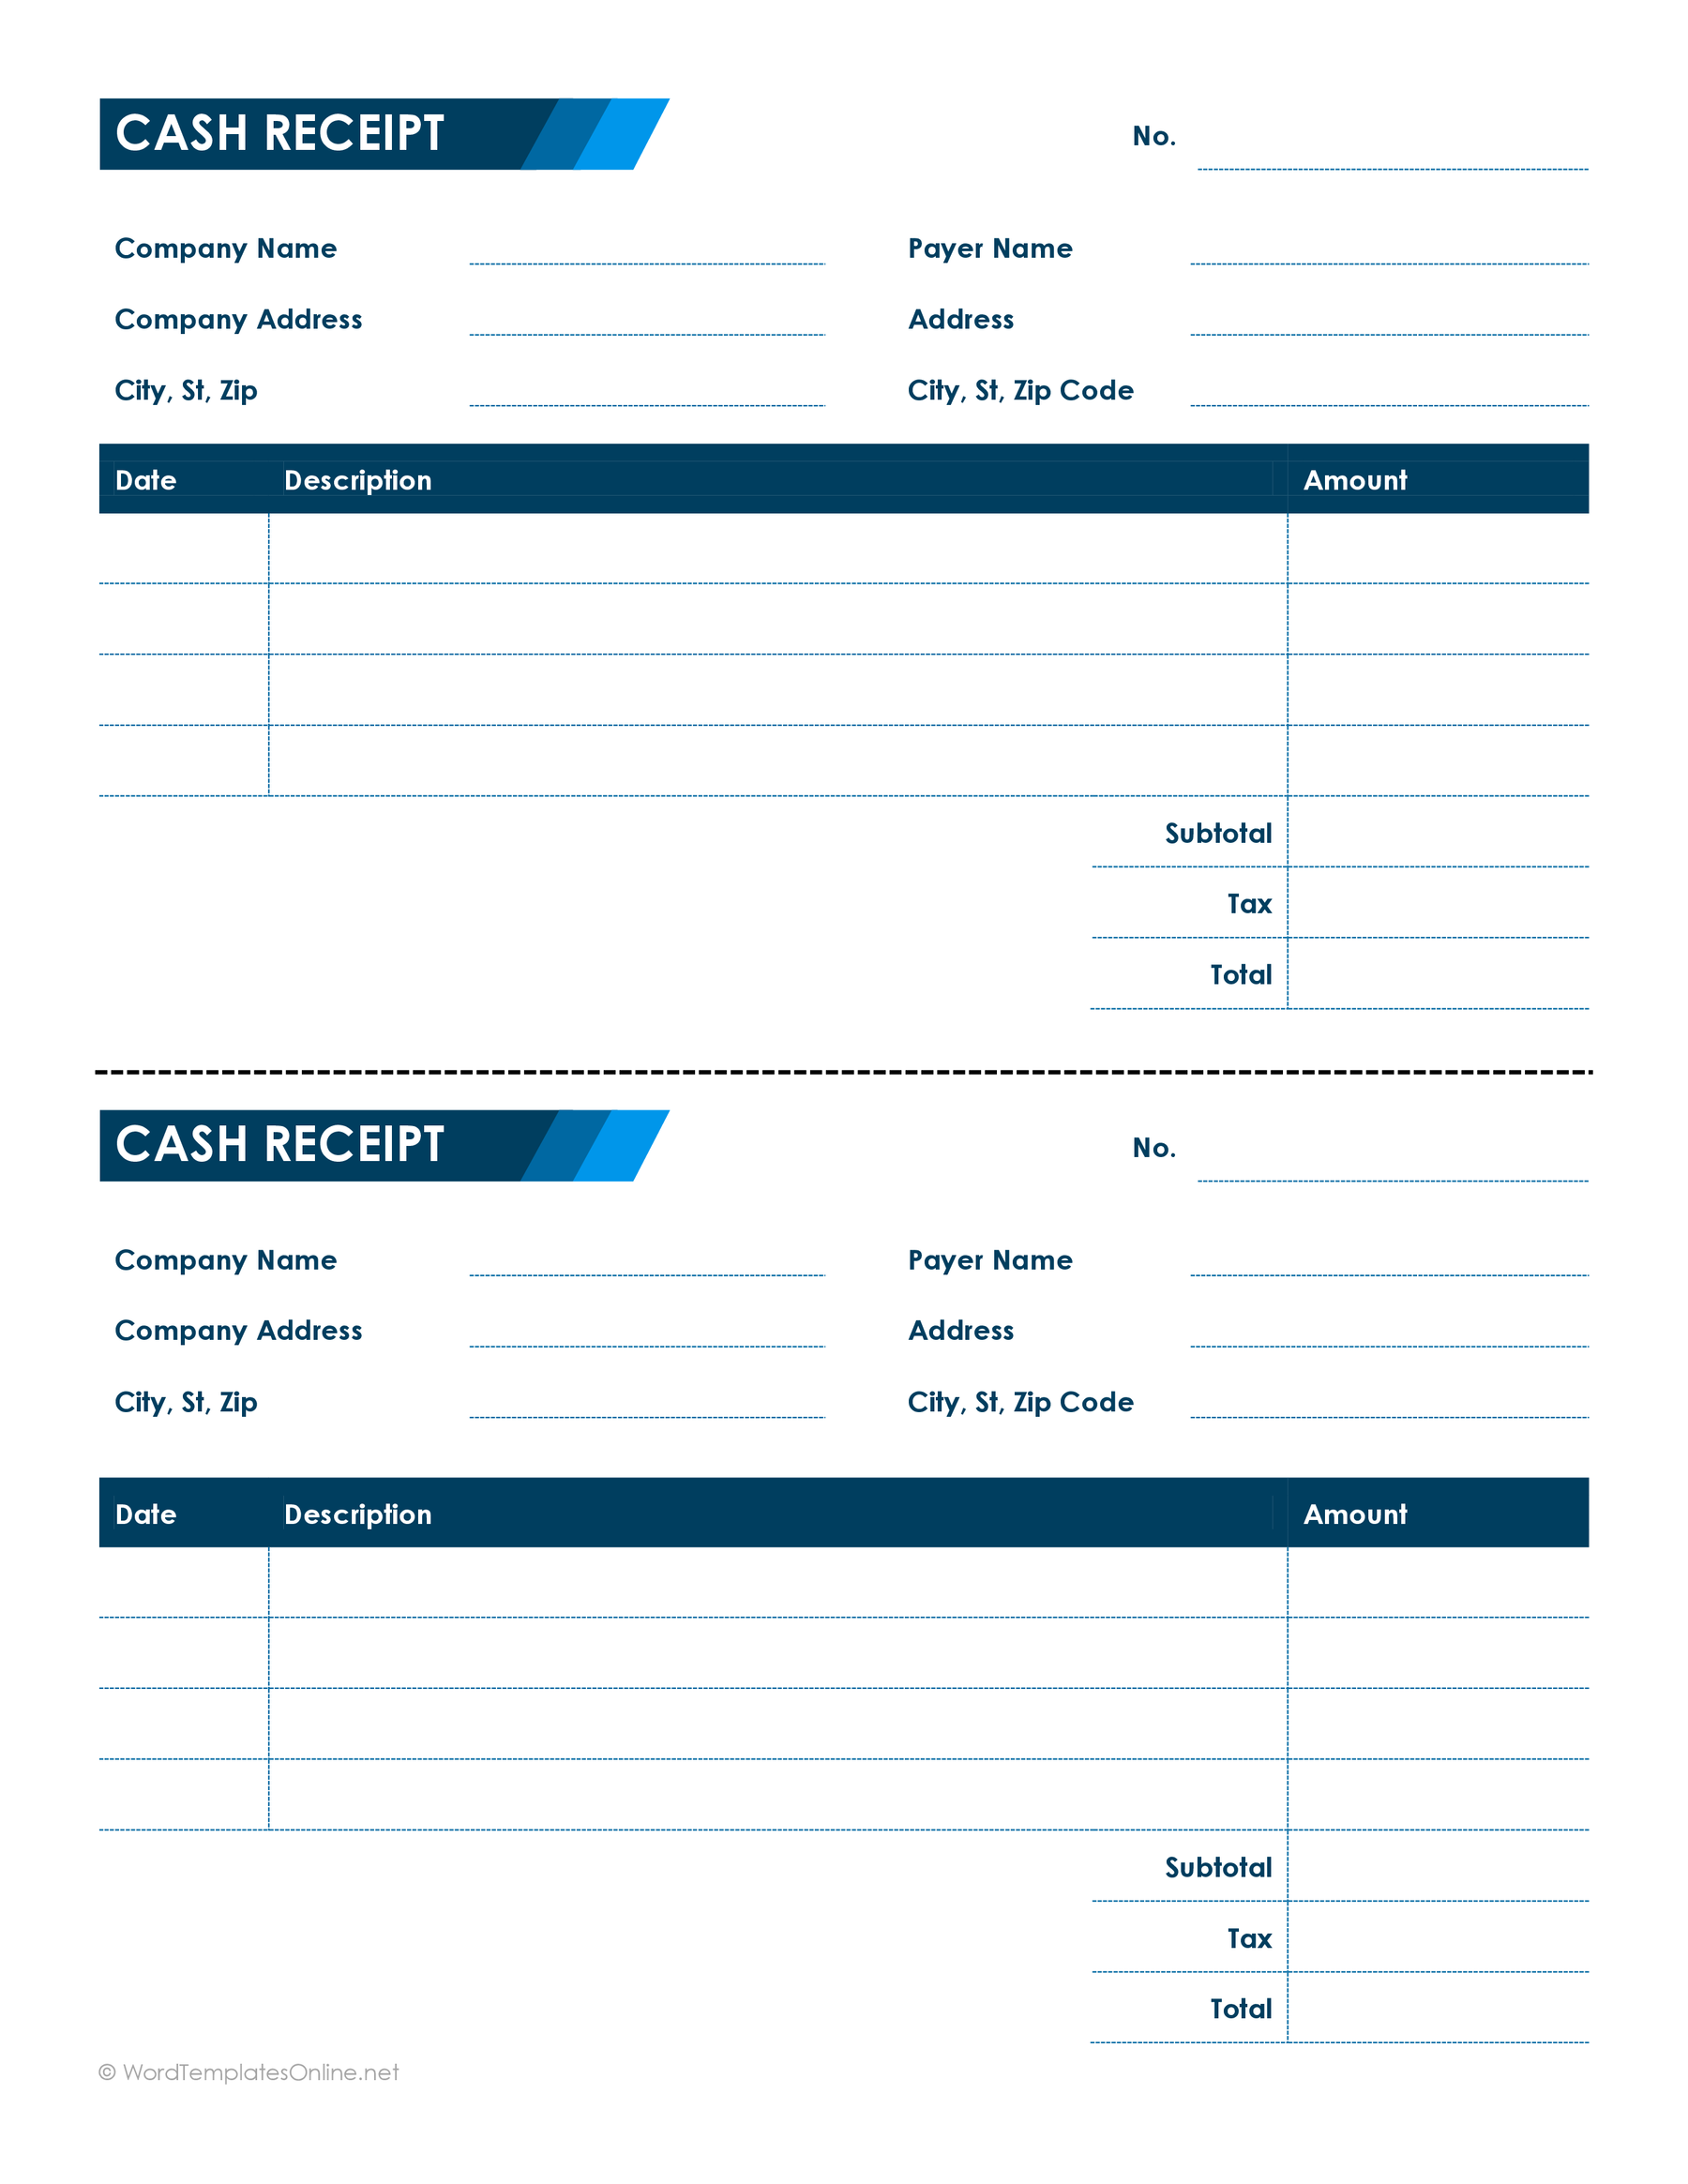 excel receipt tracker template free download